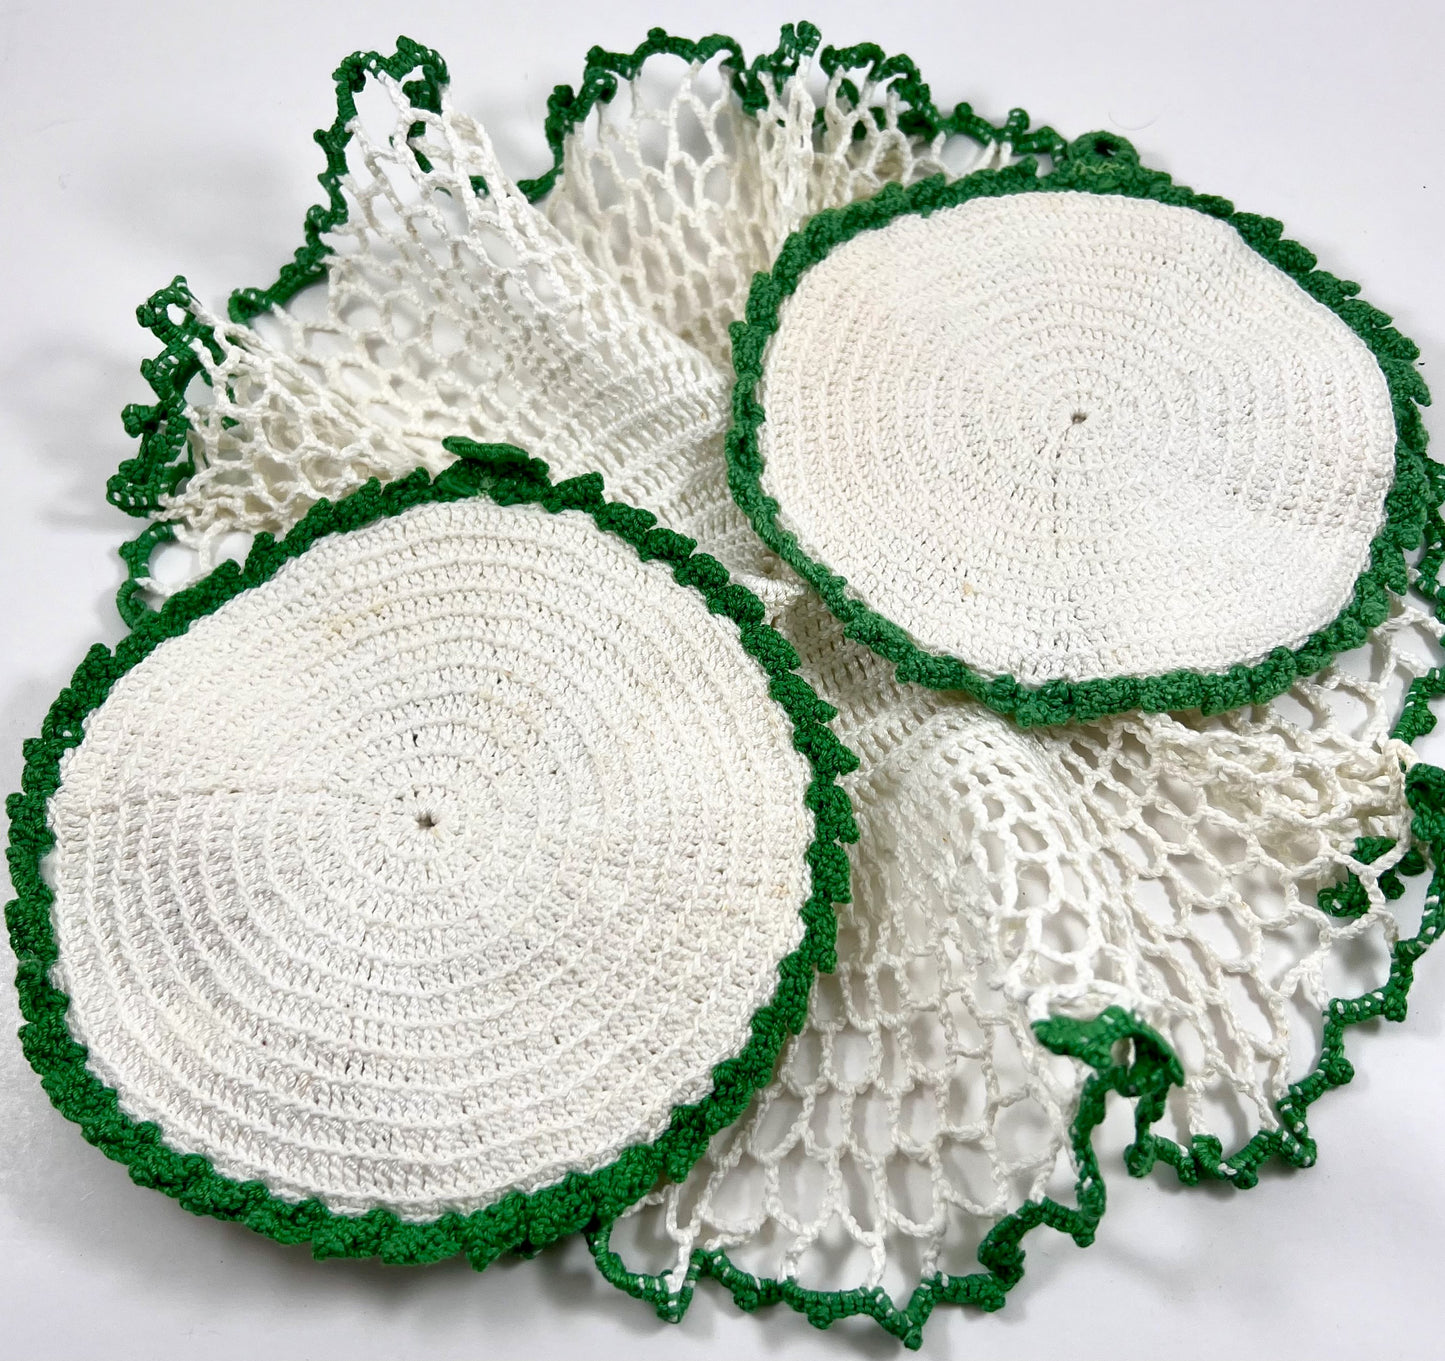 Crocheted Garden Potholder Pair, Yellow Buttercups and Grapes, Mid-century